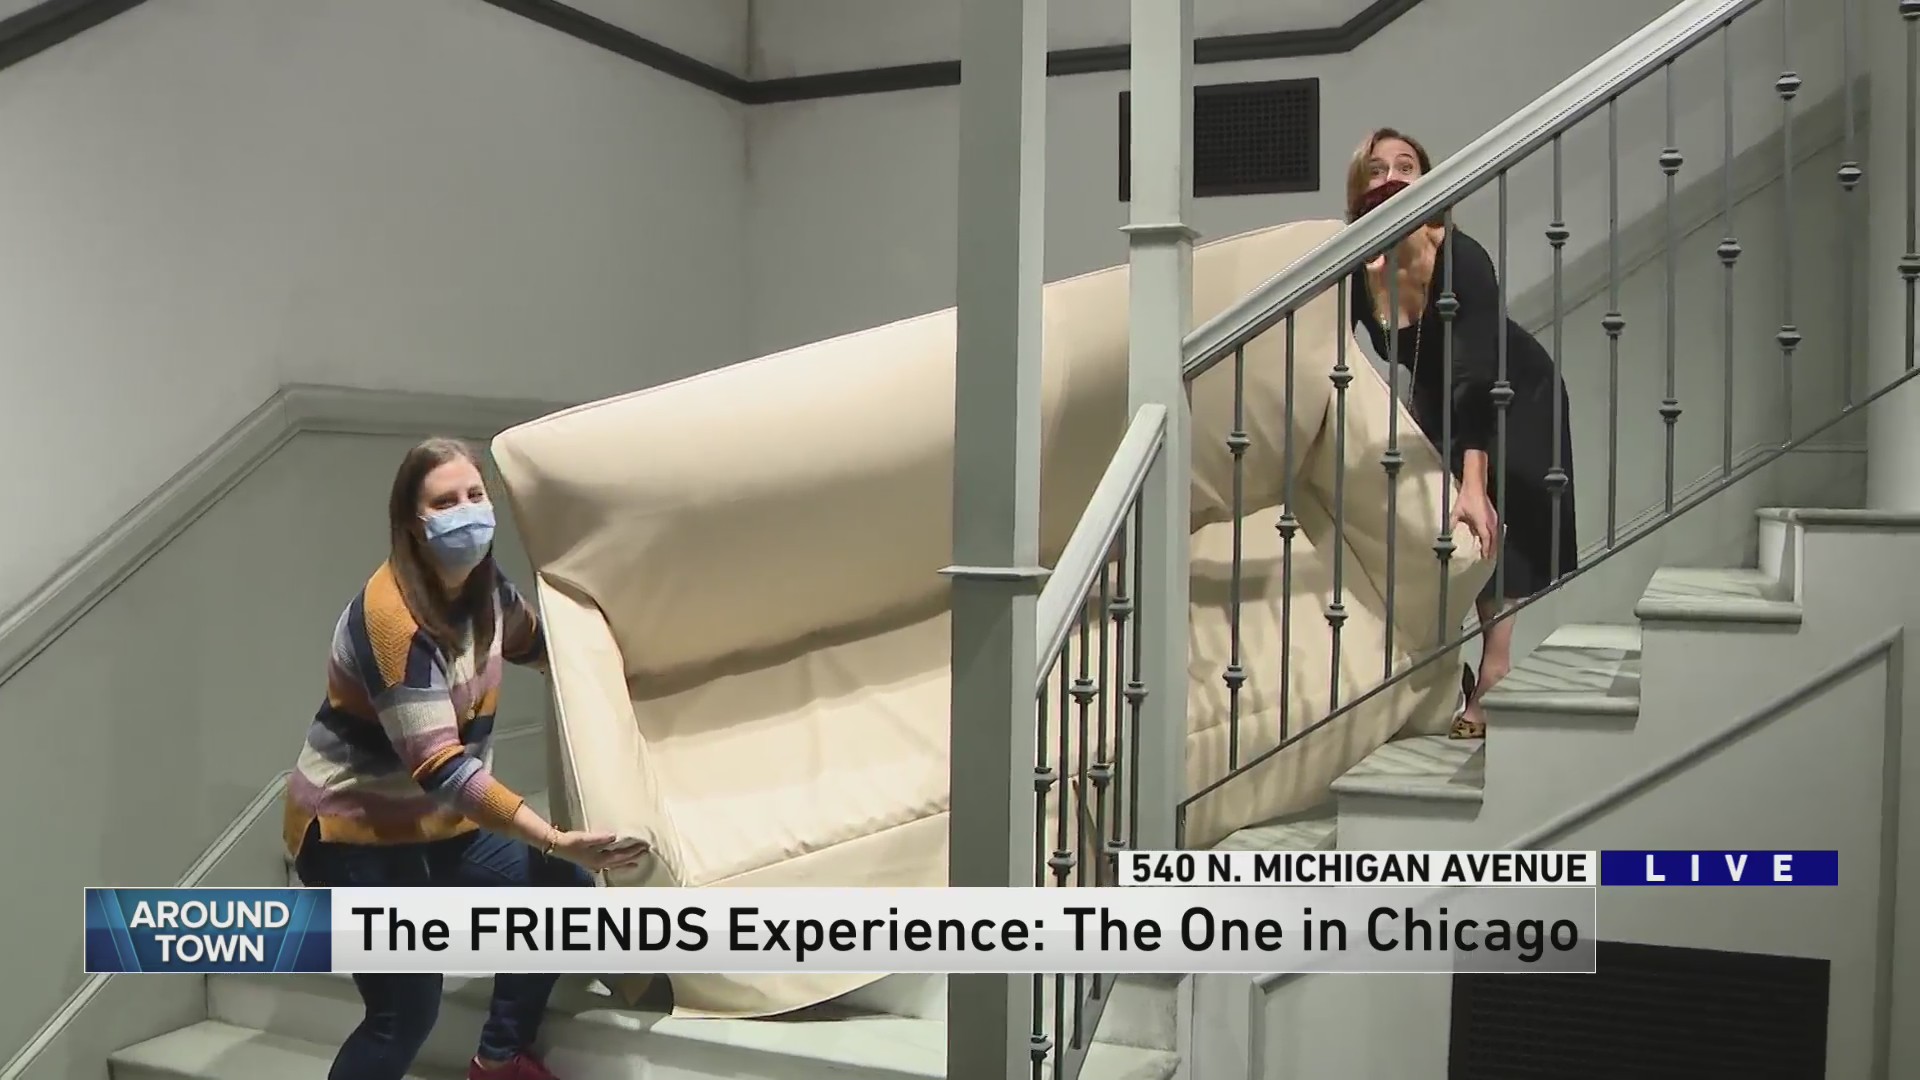 Around Town gets a sneak peek of The FRIENDS Experience: The One in Chicago